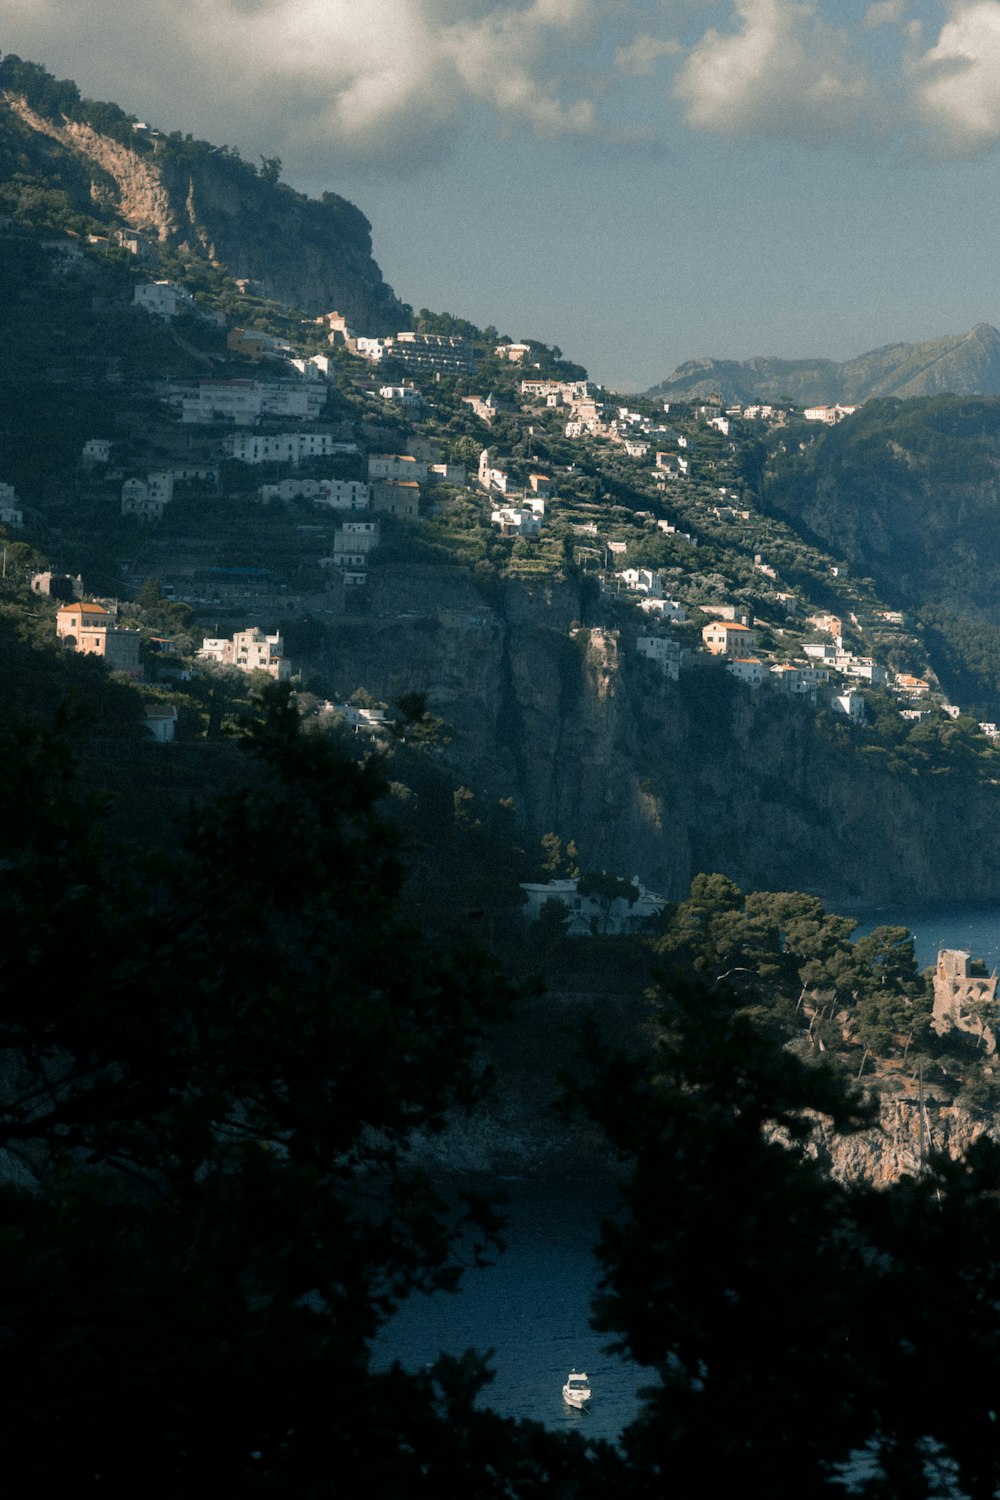 white boat on body of water near houses on cliff